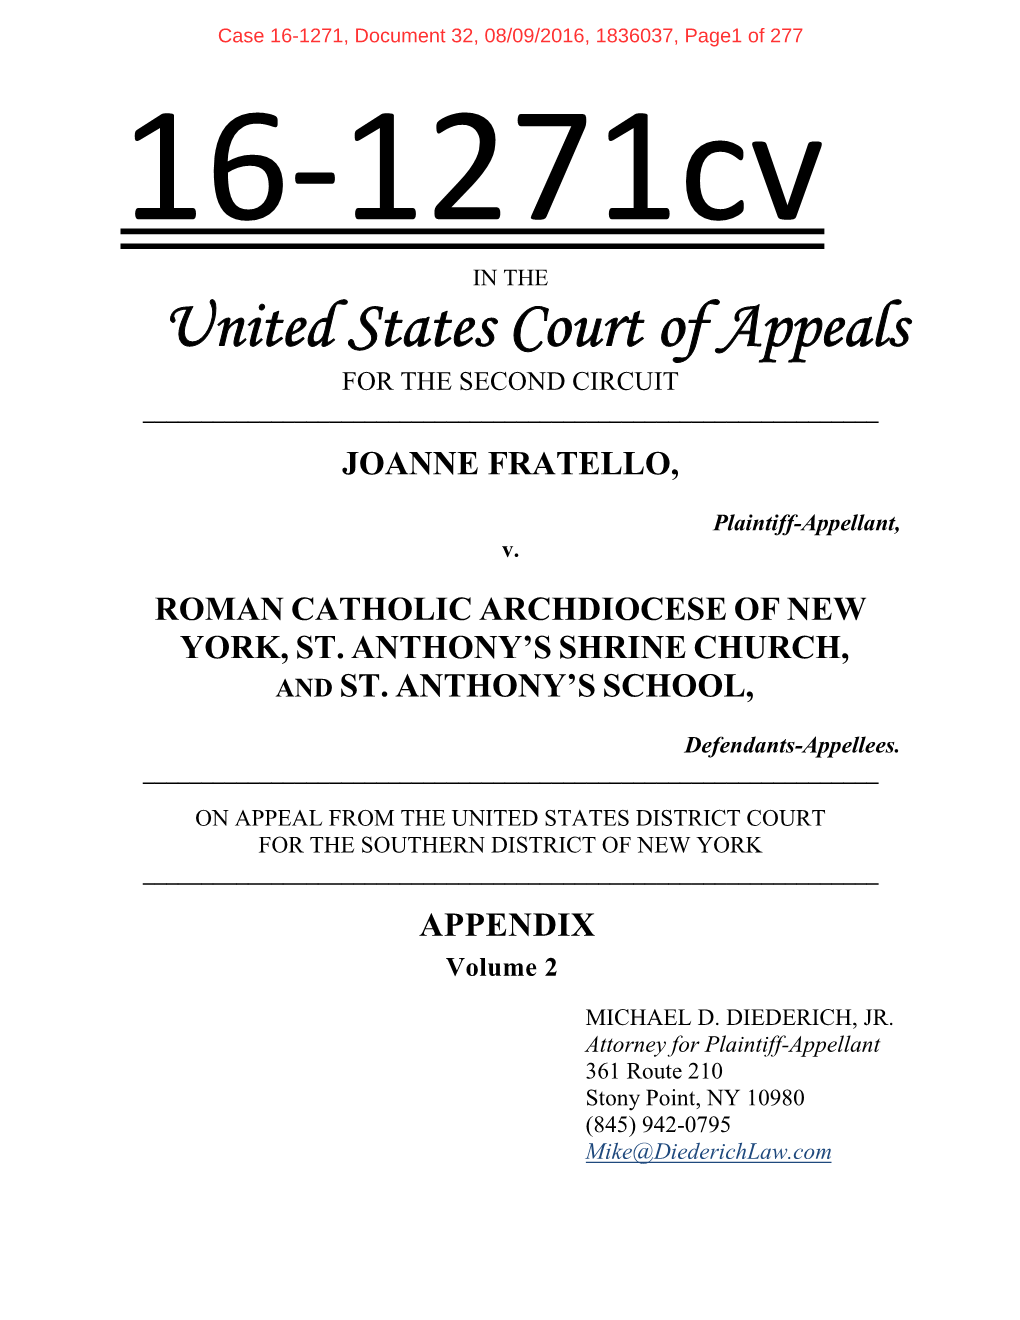 United States Court of Appeals for the SECOND CIRCUIT ______JOANNE FRATELLO